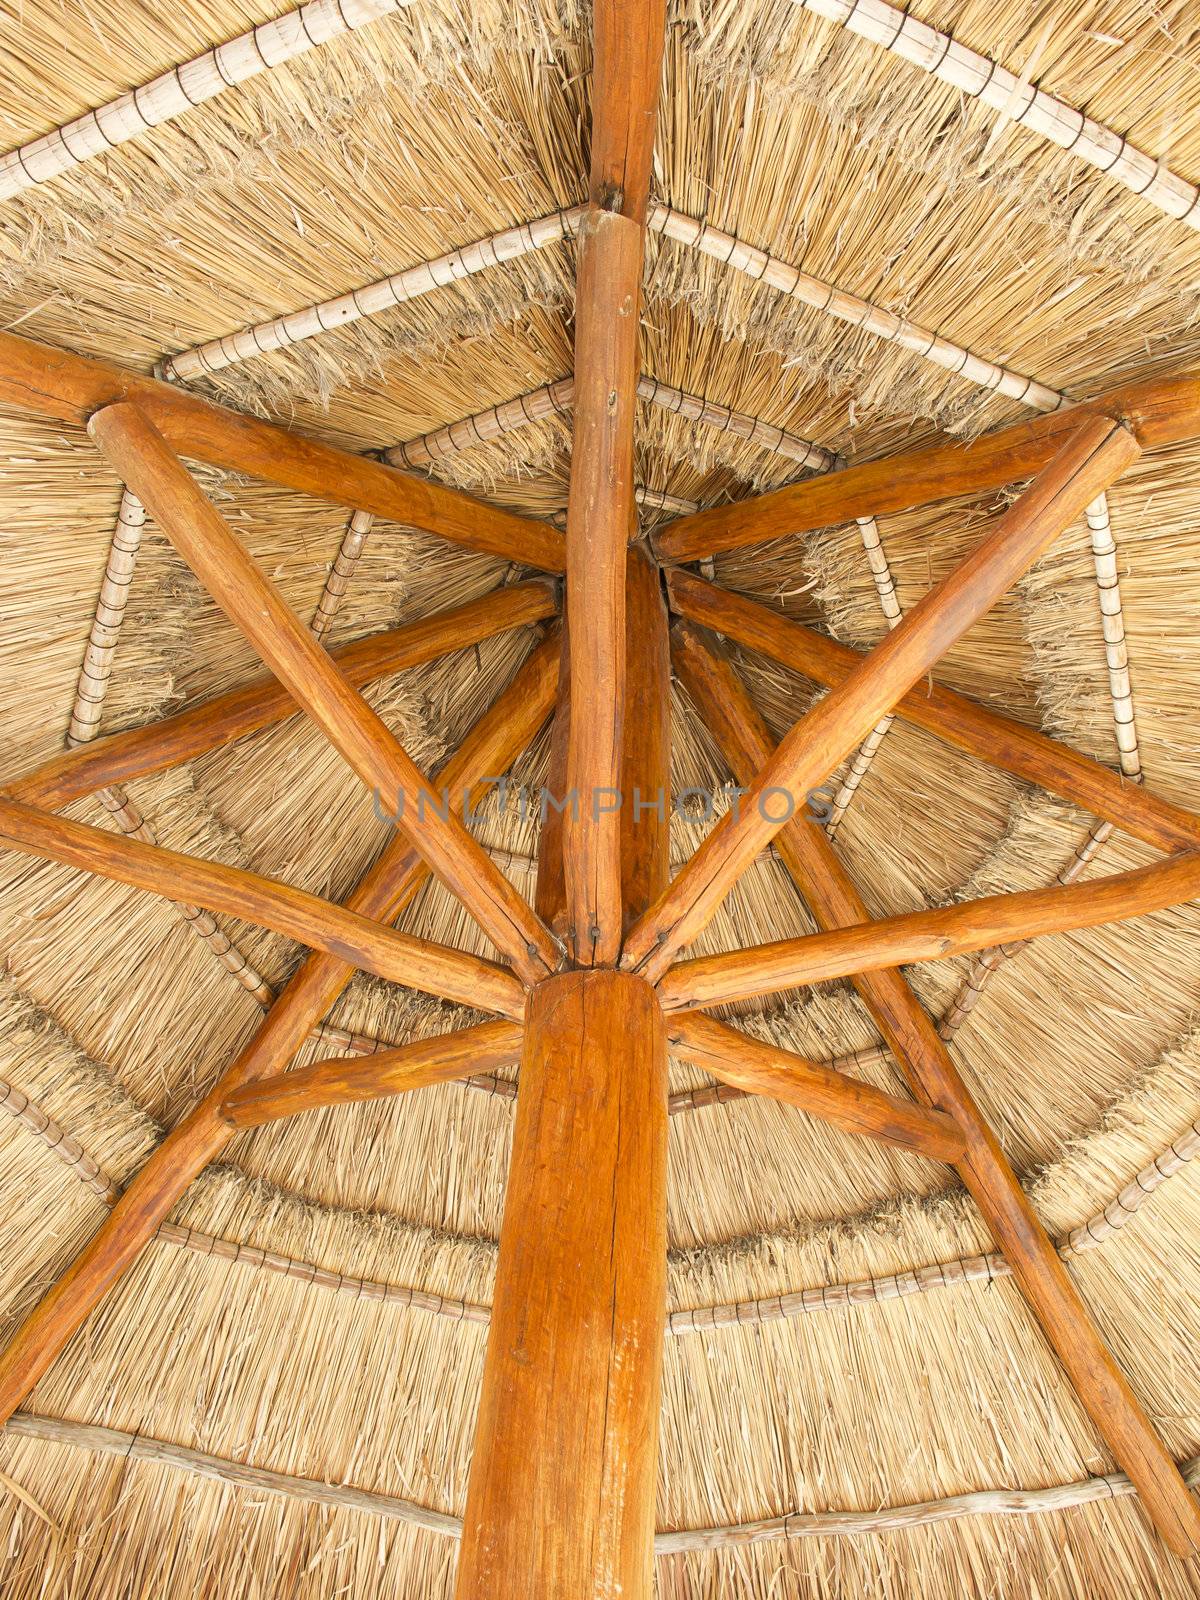 view from inside a straw parasol